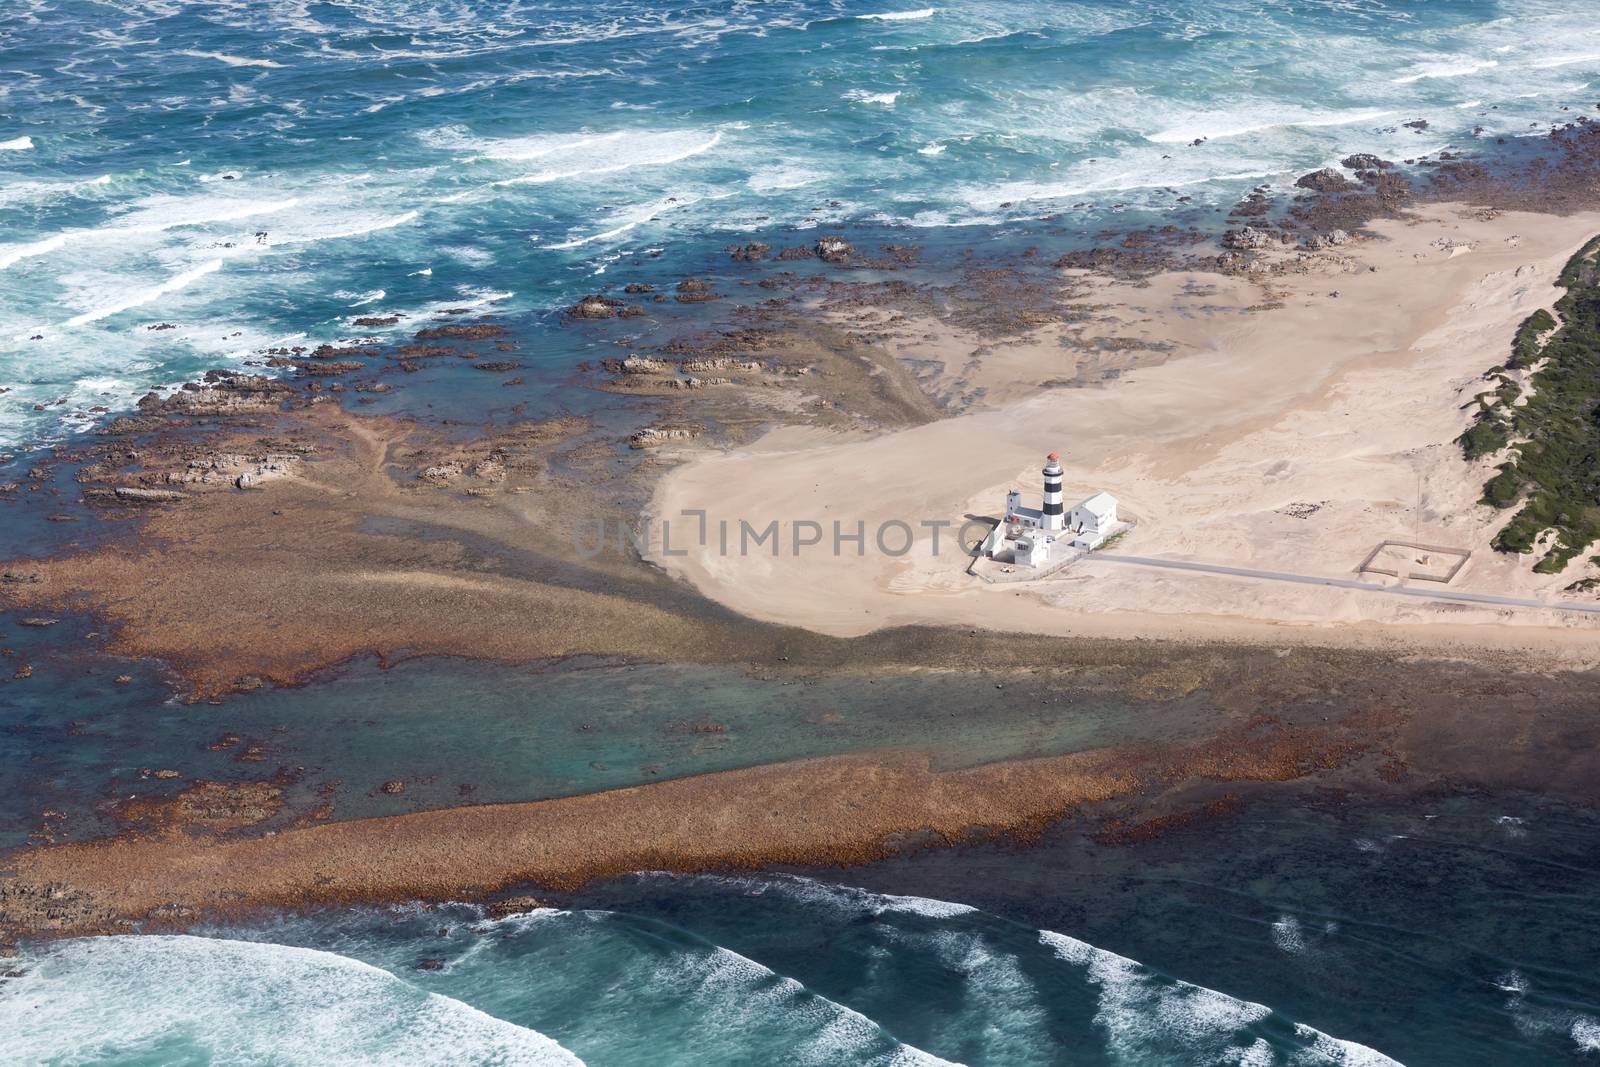 Aerial view of the lighthouse and beach at Cape Recife, Port Elizabeth